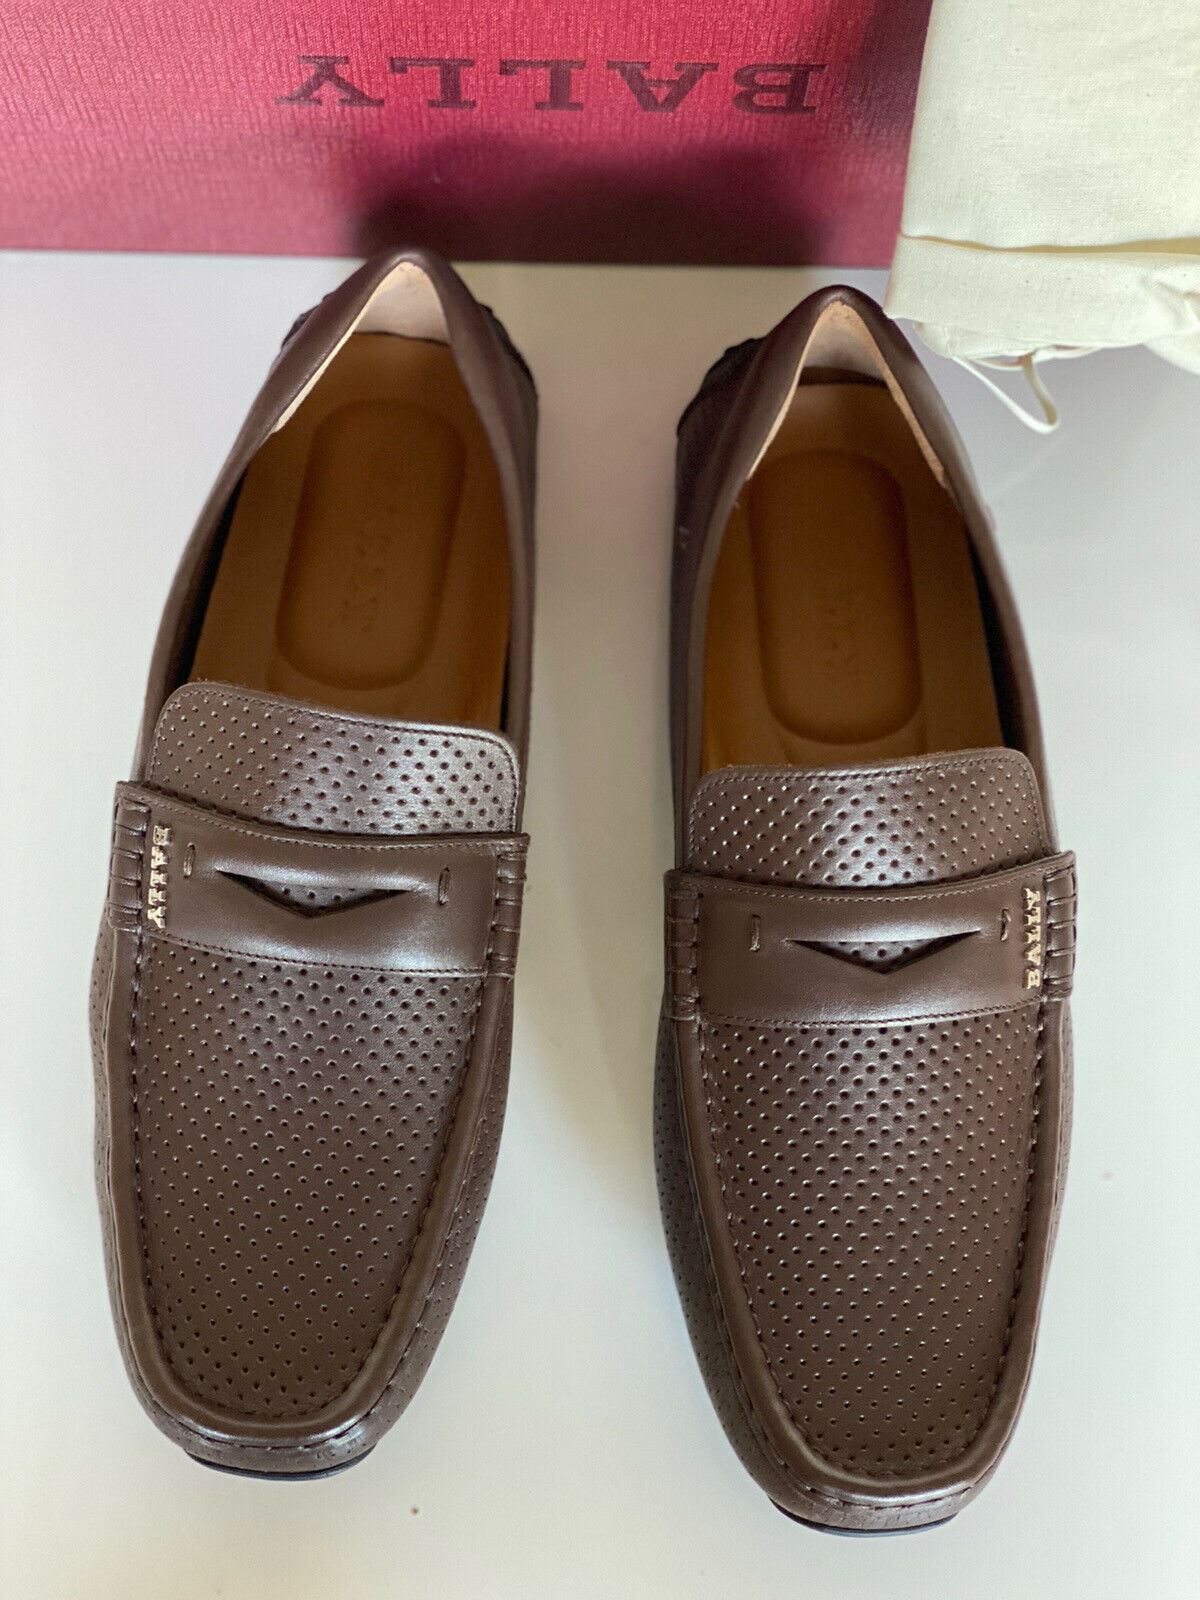 NIB Bally Perforated Calf Leather Driver Loafers Shoes Coconut 10.5 D US 6231354